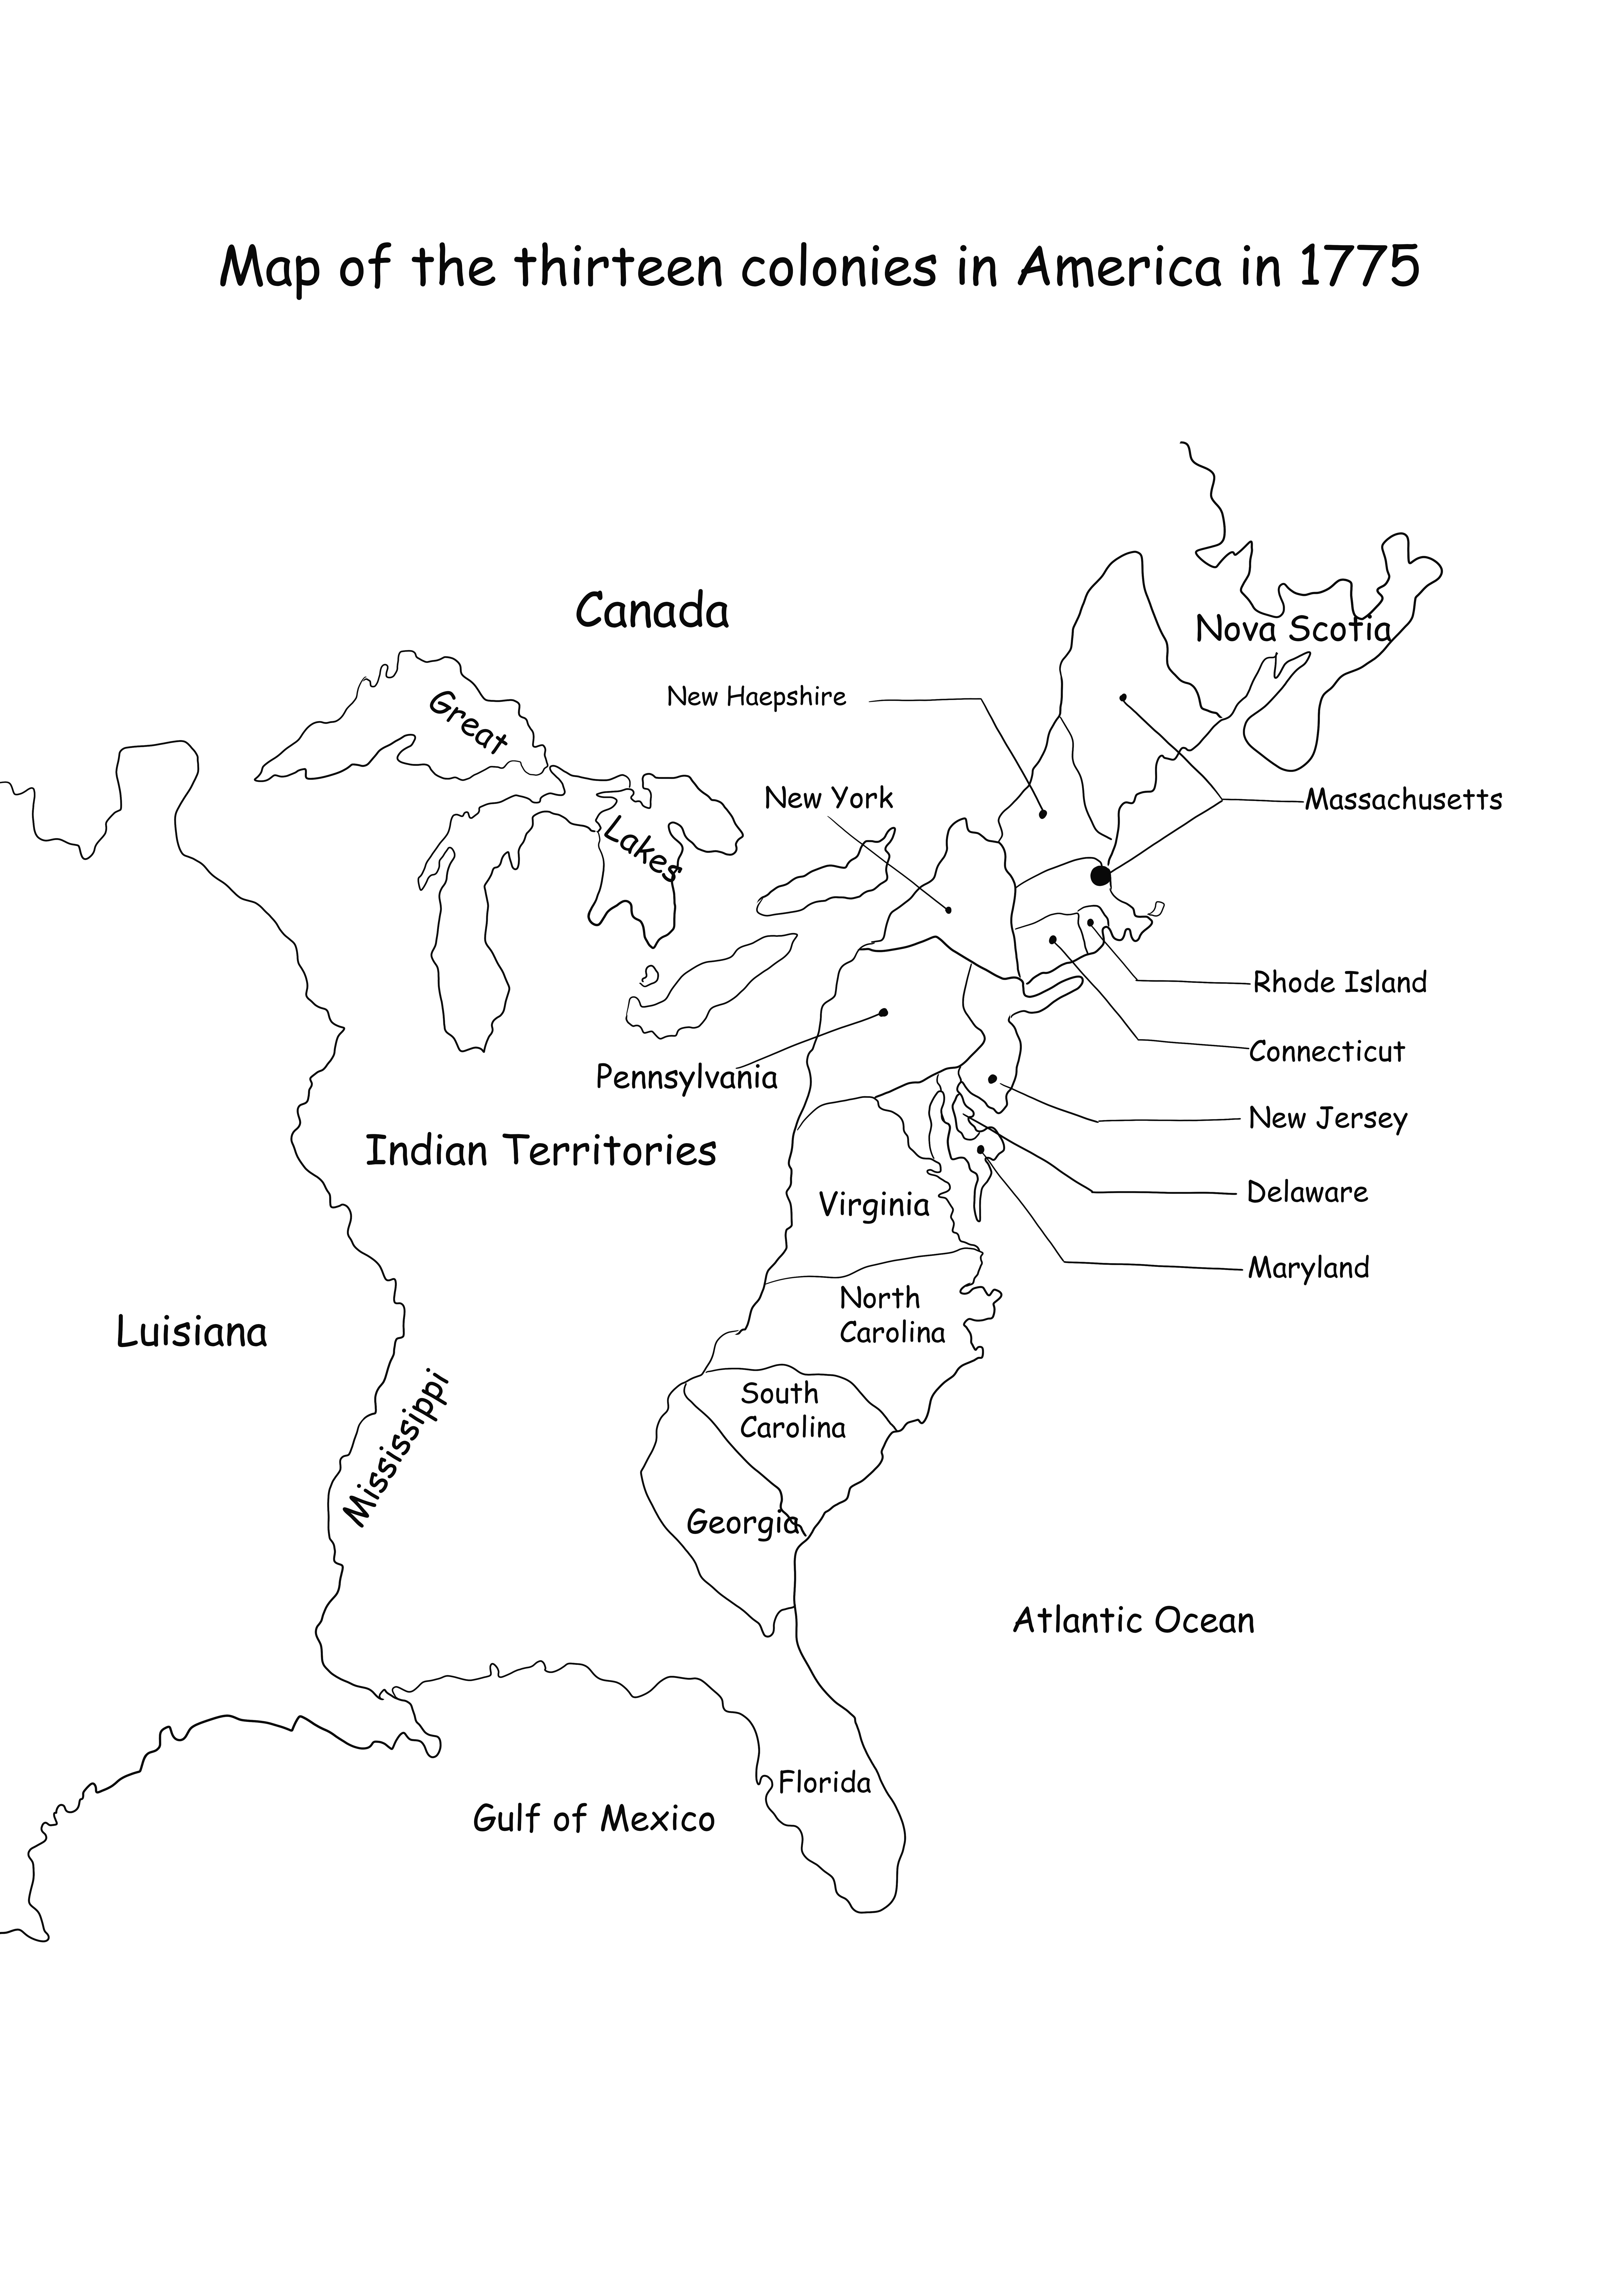 Colonies Map-an educational coloring sheet free-to-print for kids to learn about the history